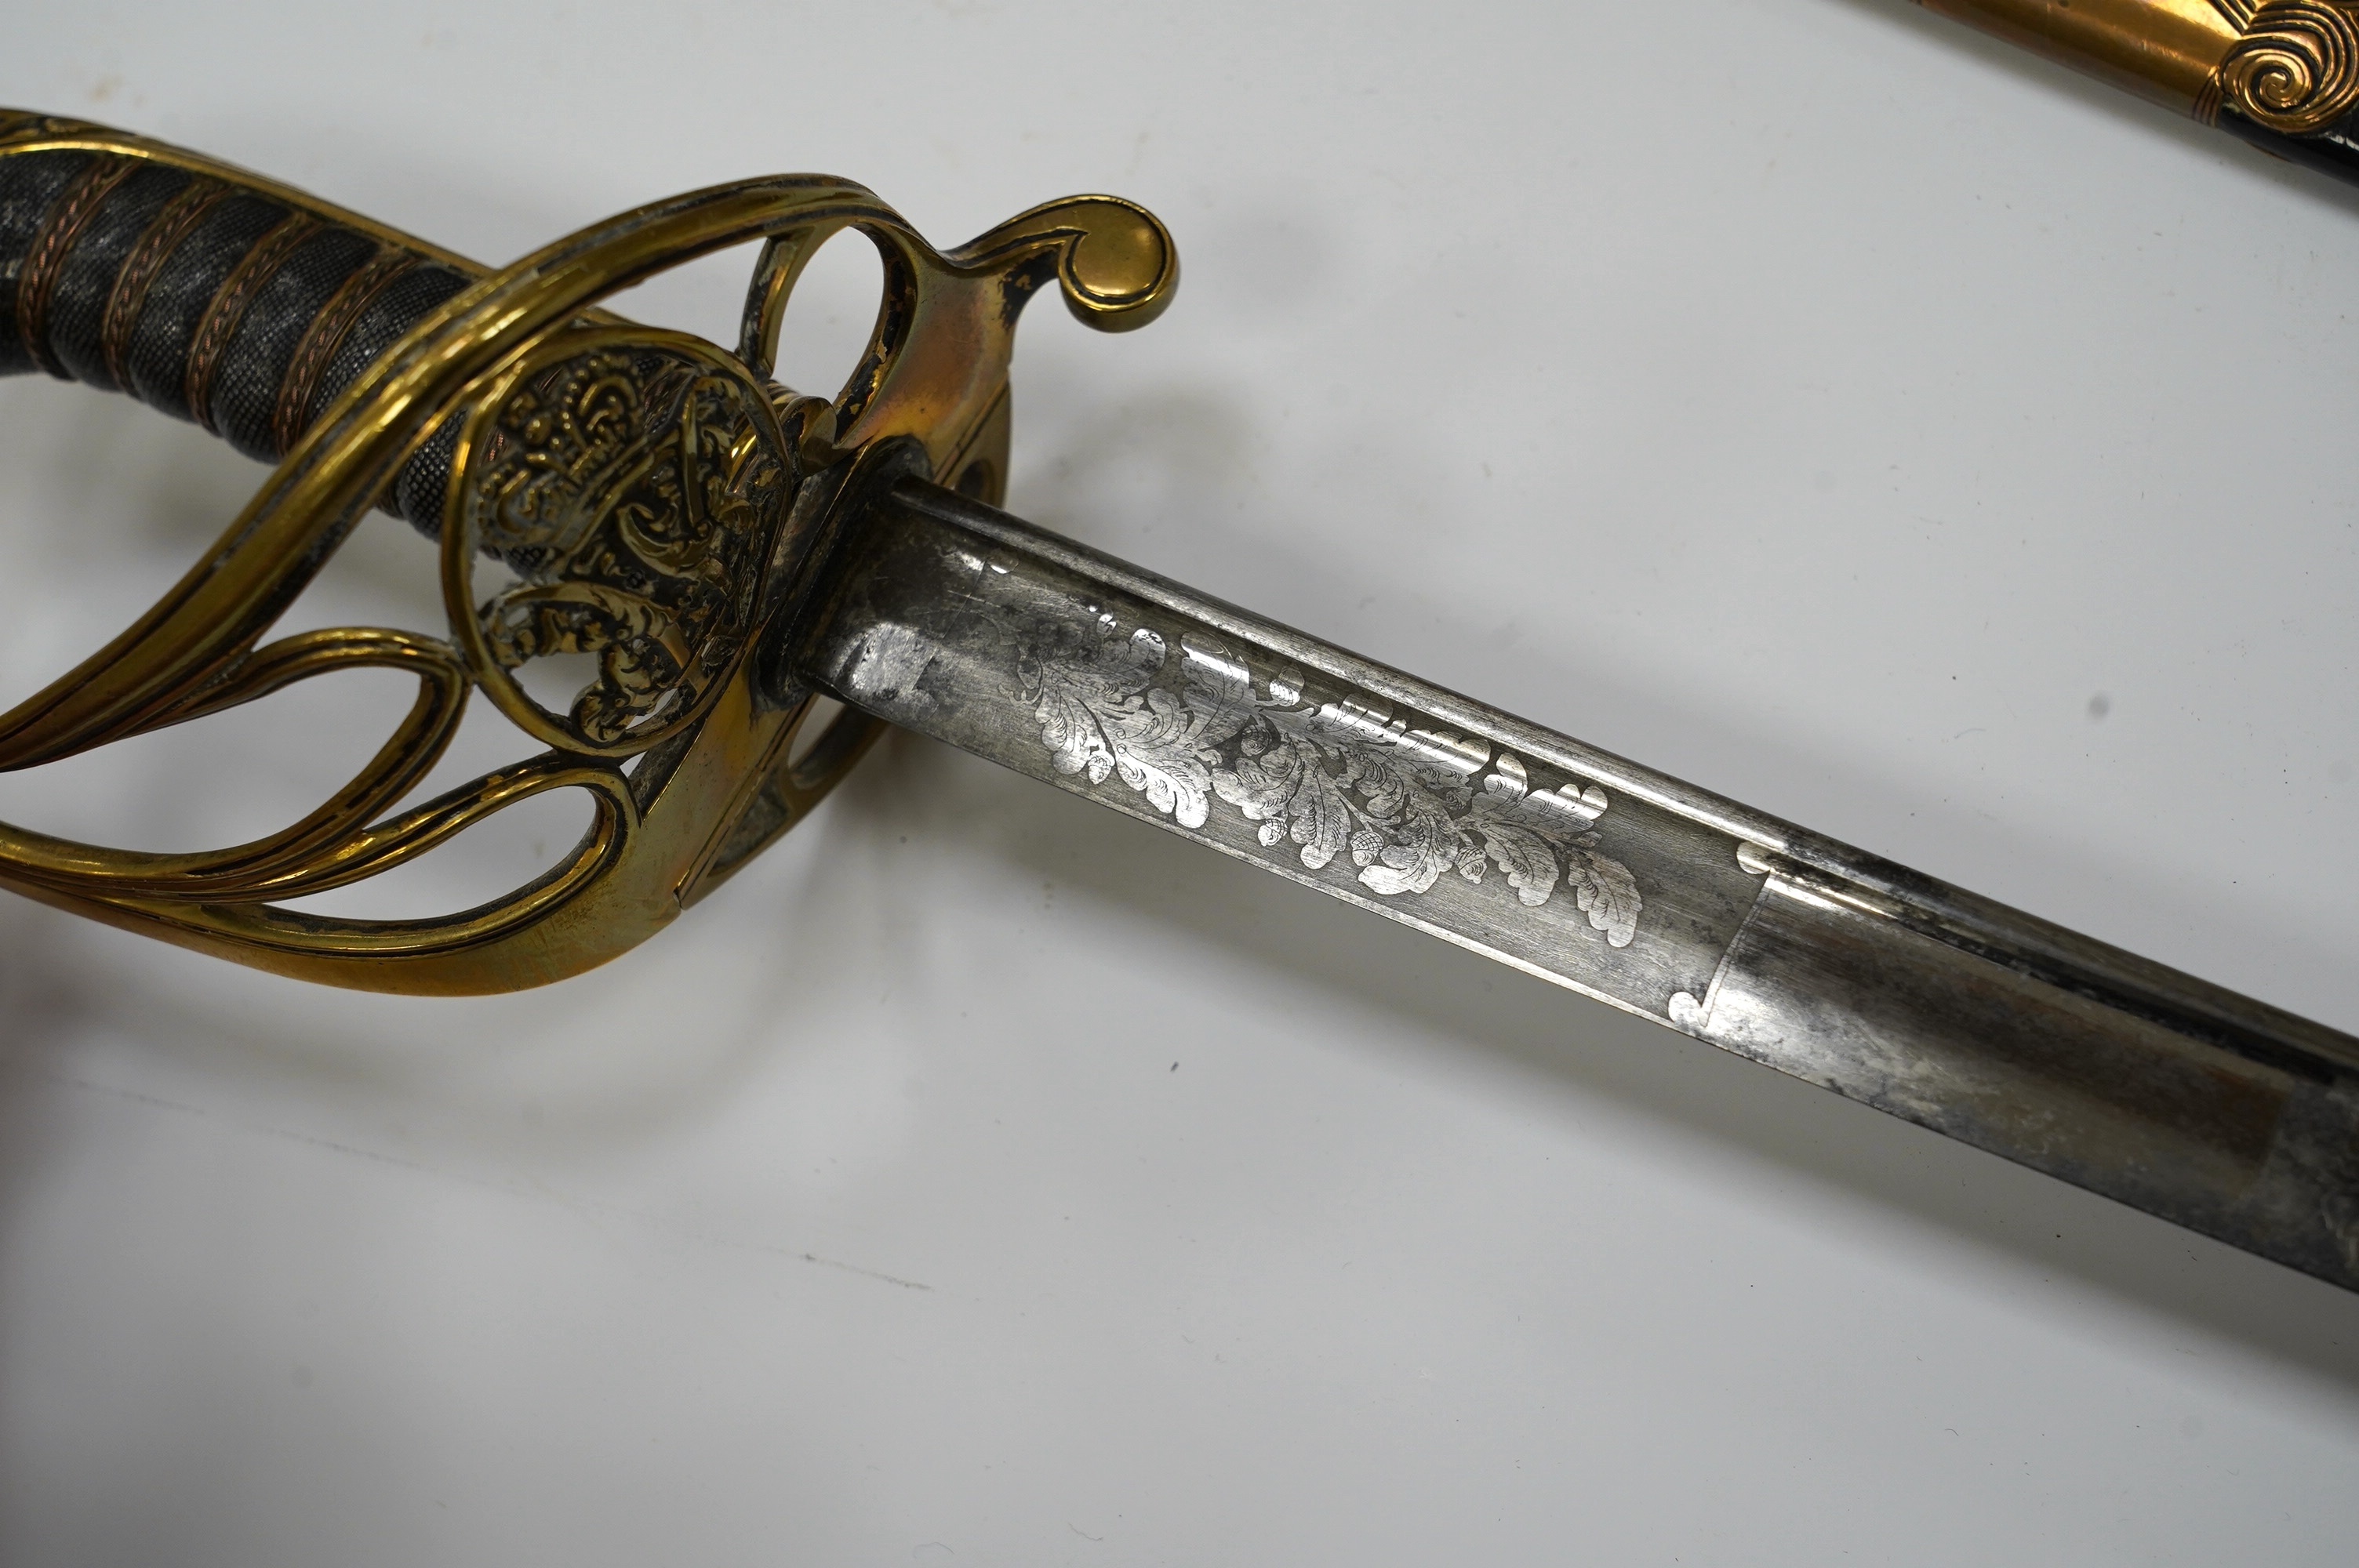 An early 19th century officer's sword, William IV cypher to knuckle guard, folding knuckle guard, engraved curved blade with William IV cypher and makers signature; ‘Vernon 4 Charing Cross London’, leather scabbard with